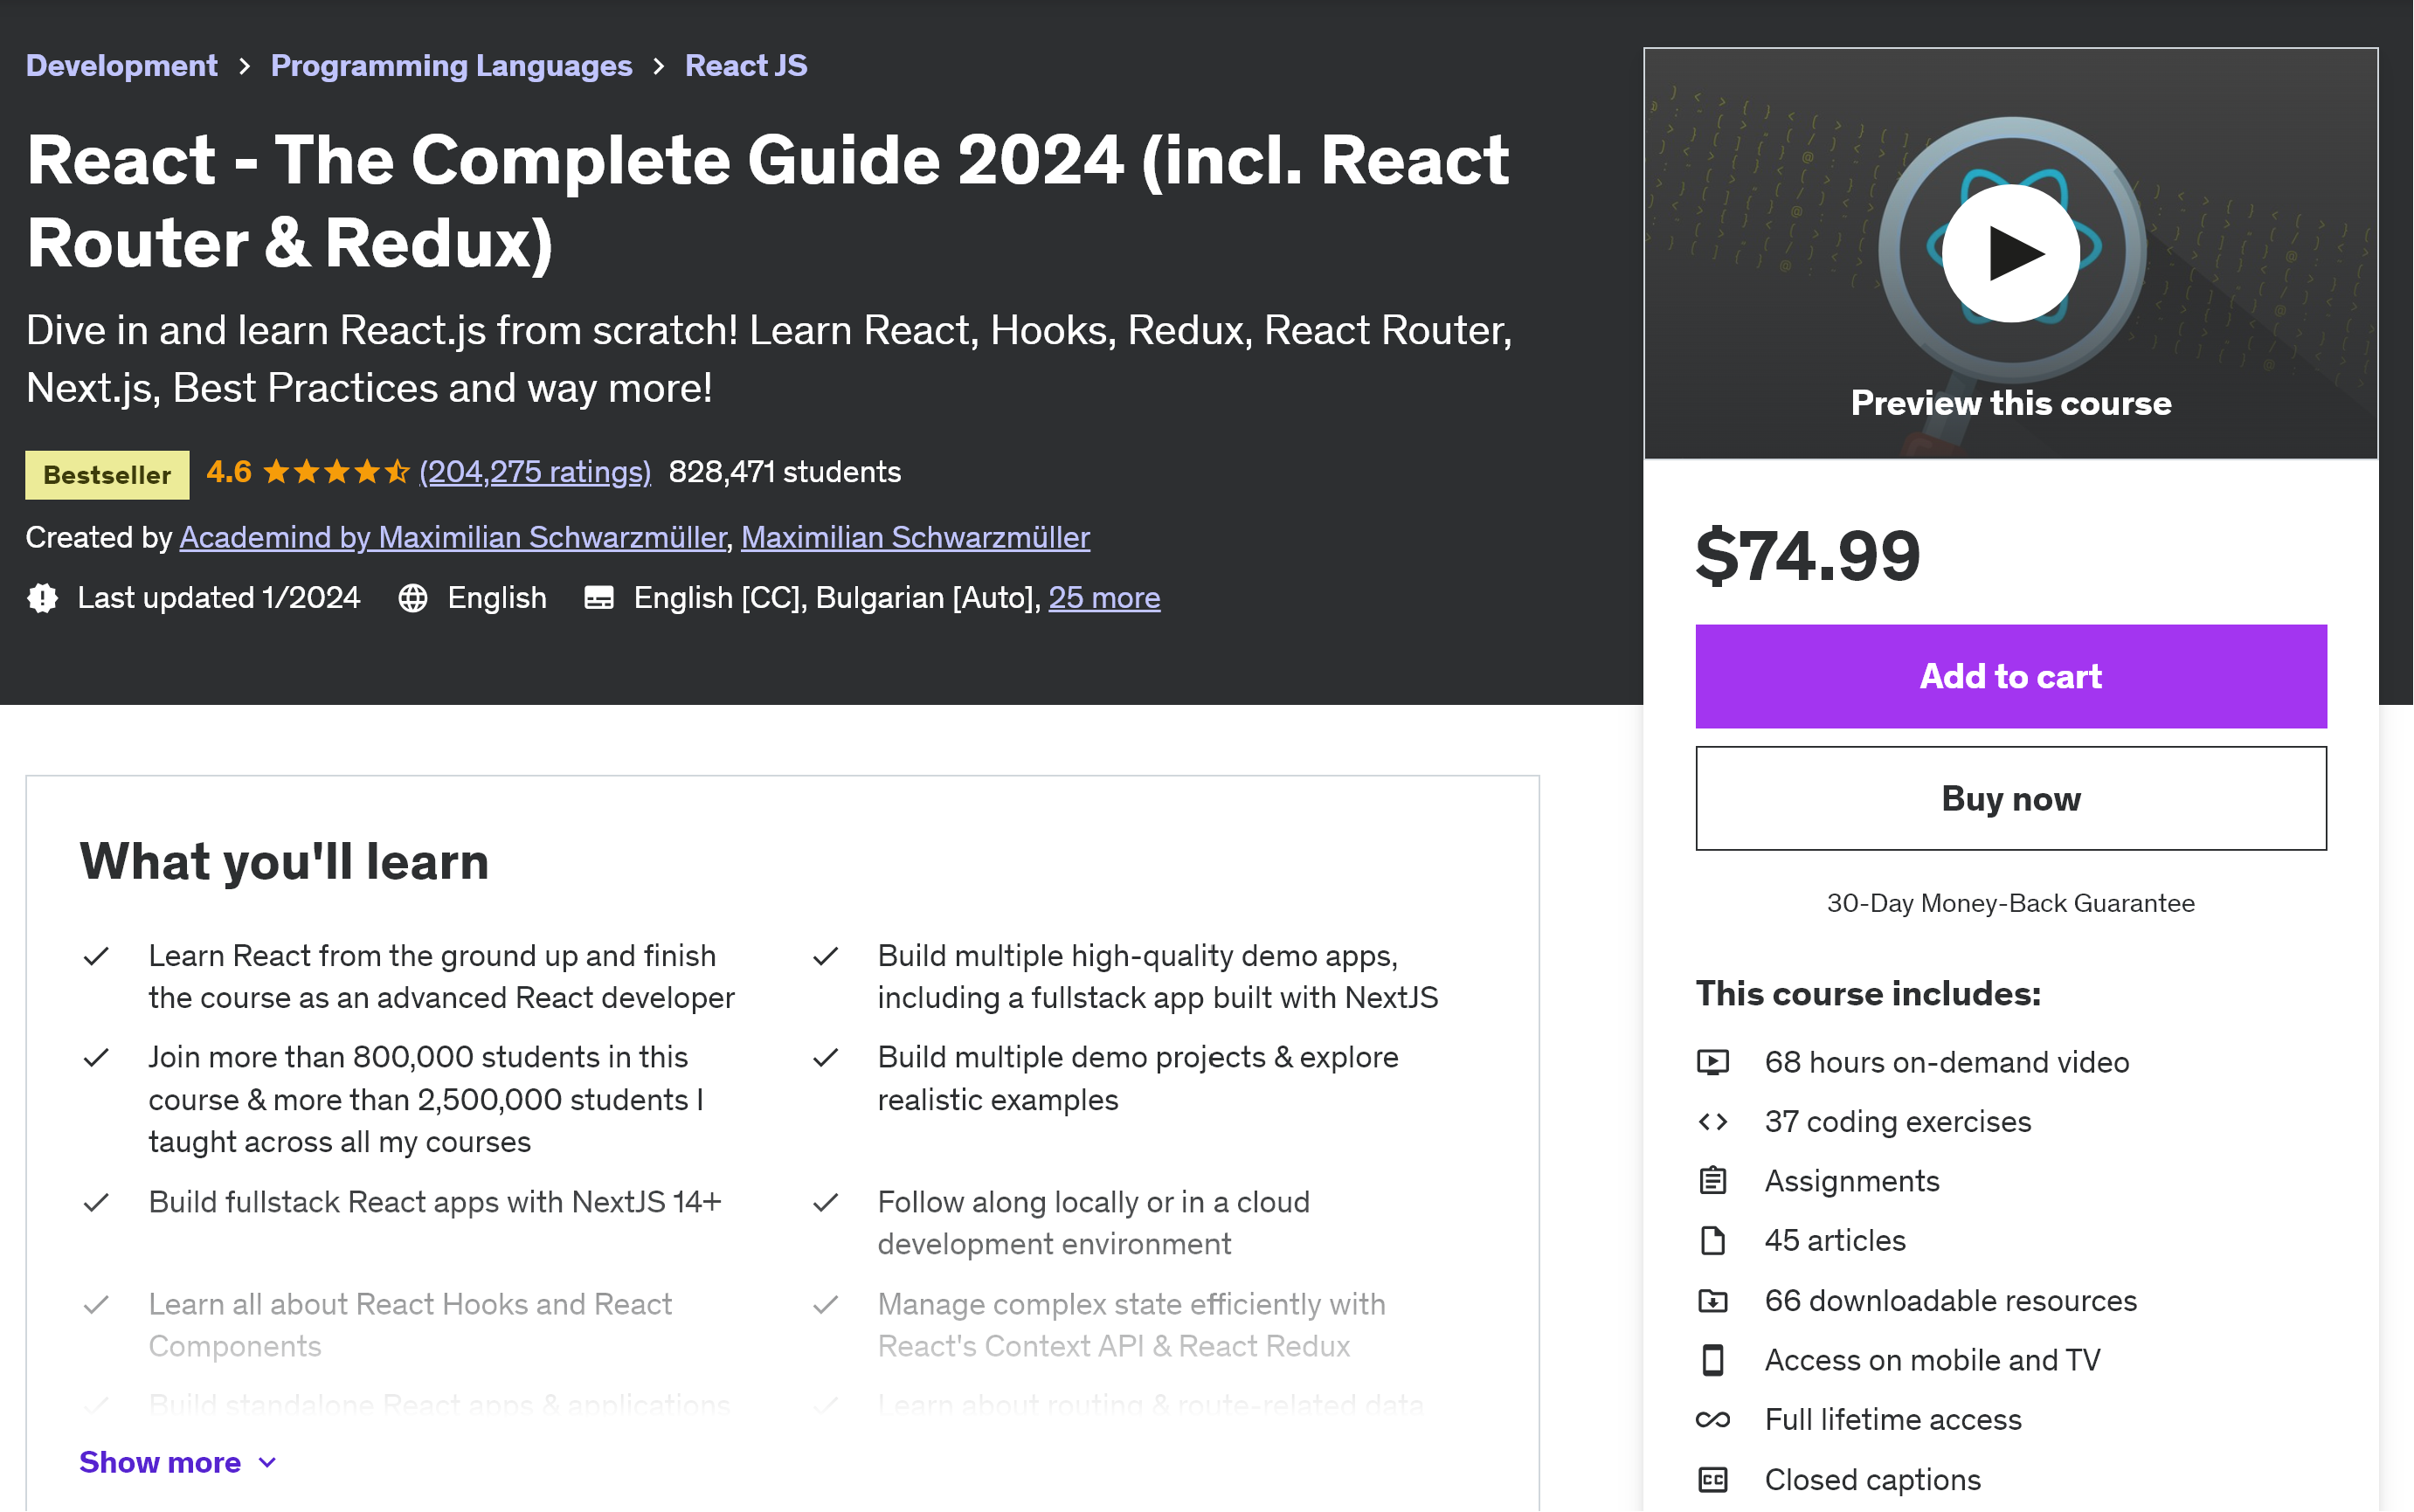 React - The Complete Guide course on Udemy By Maximilian Schwarzmüller